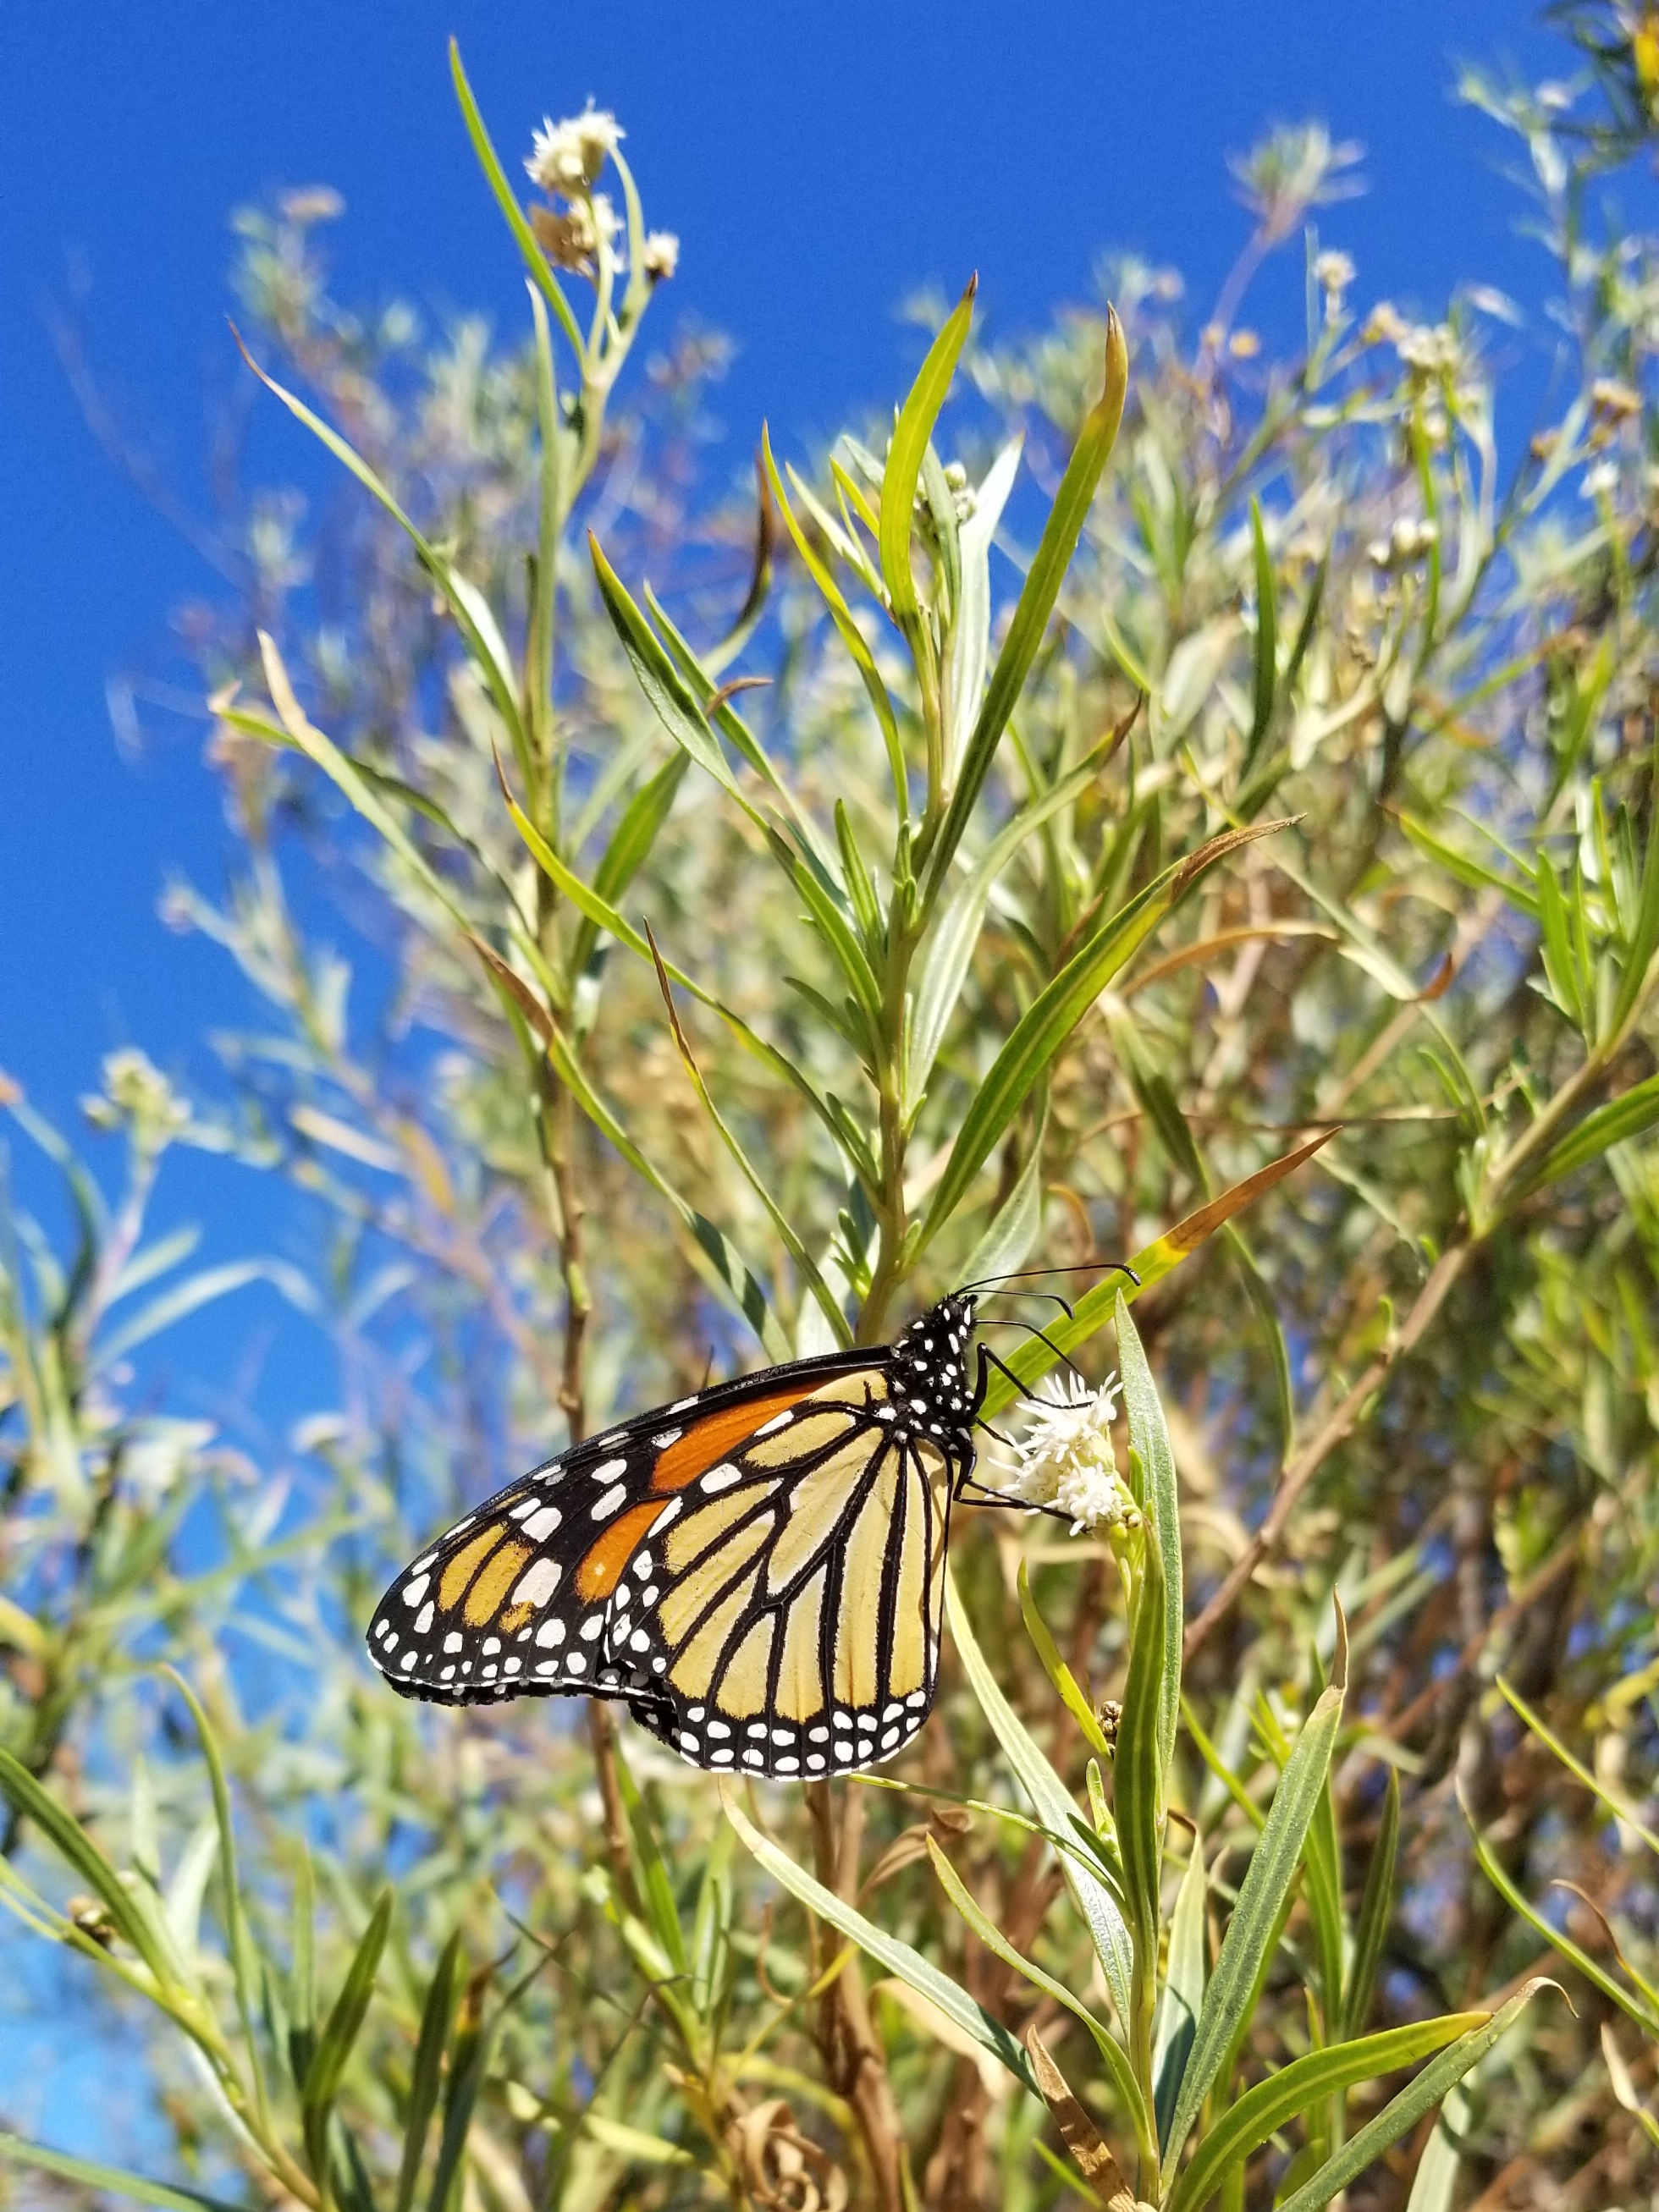 An orange and black monarch butterfly drinks nectar from the creamy-white flowers of mule fat